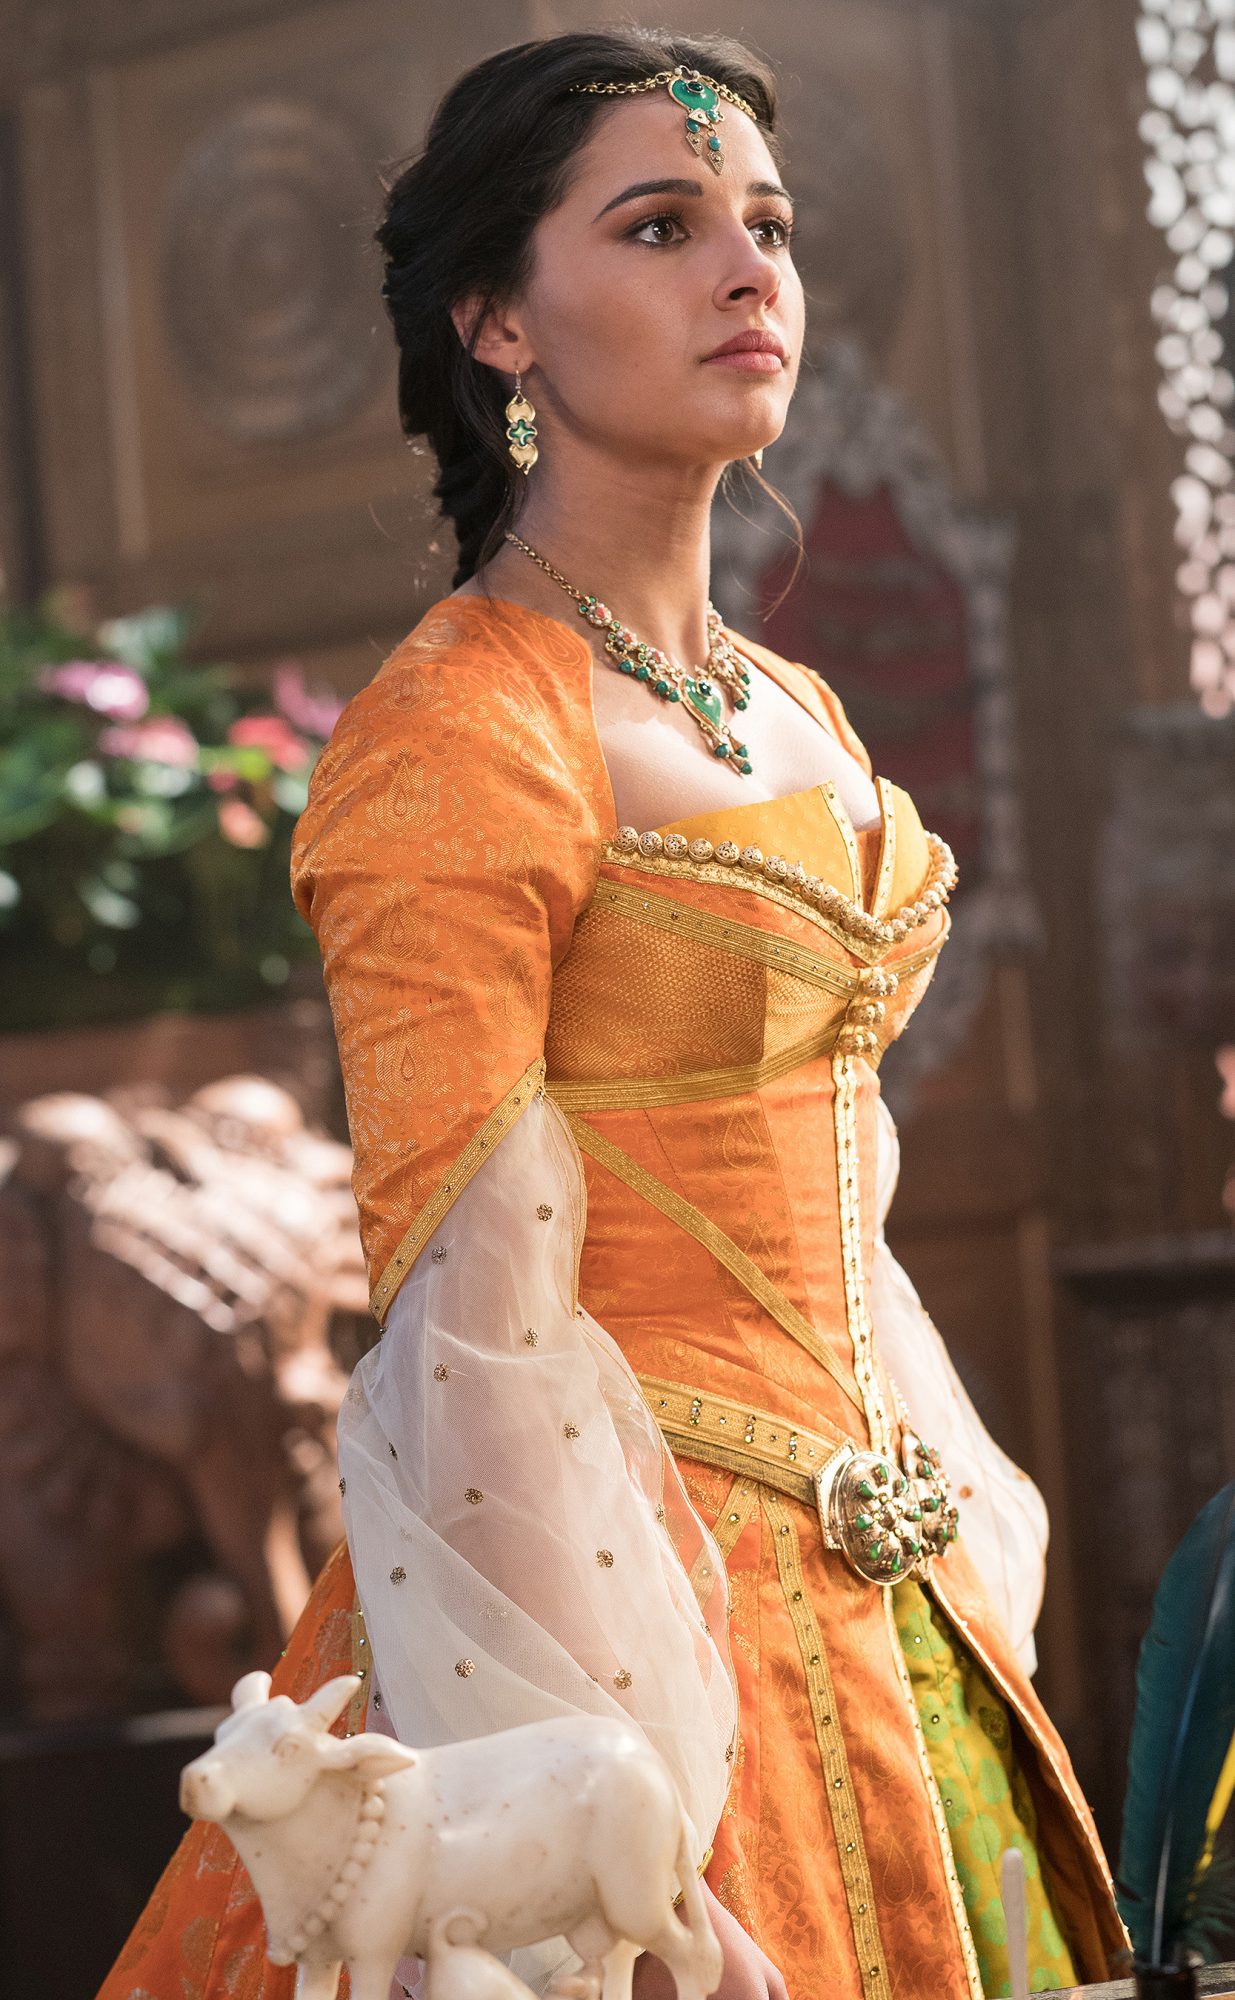 How has disney portrayed princess fashion in live-action versions?